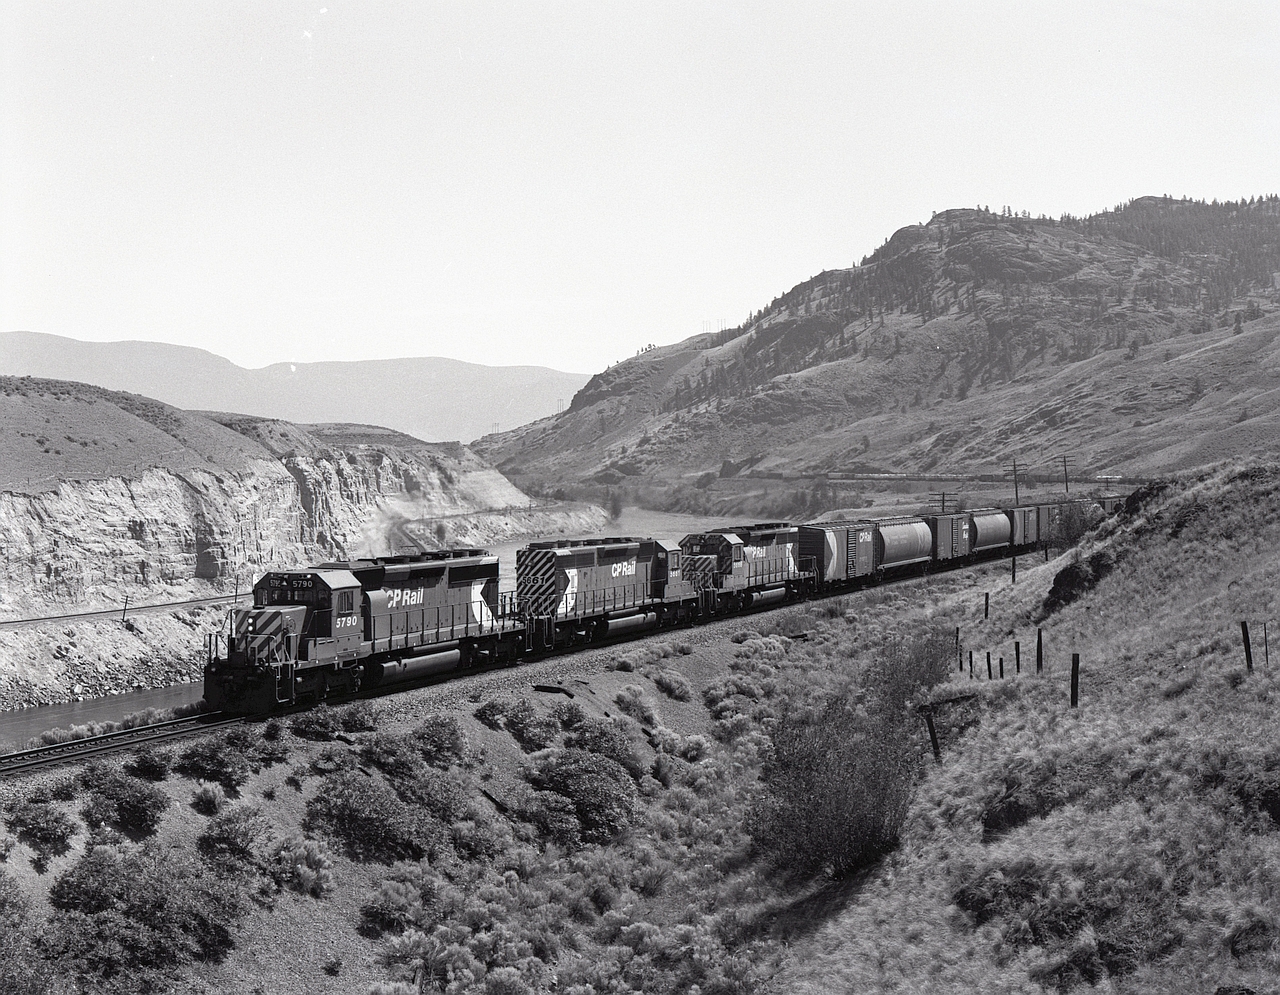 West of Kamloops, CP follows the south shore of Kamloops Lake to Savona, then starts a significant upgrade along the Thompson River to Walhachin.  In earlier years, this was a helper grade with daunting steeper sections instead of today’s steady climb.  On Sunday 1980-06-08 at 1107 PDT, a westbound with SD40-2s 5790 + 5661 + 5666 (one with wide stripes and two with narrow ones, and all with full-height multimarks) is working hard at mileage 28.5 with three more miles to Walhachin.

In the distance near the tail end, evidence of the lower older grade can be seen, and on the other side of the river is the CN Ashcroft sub.